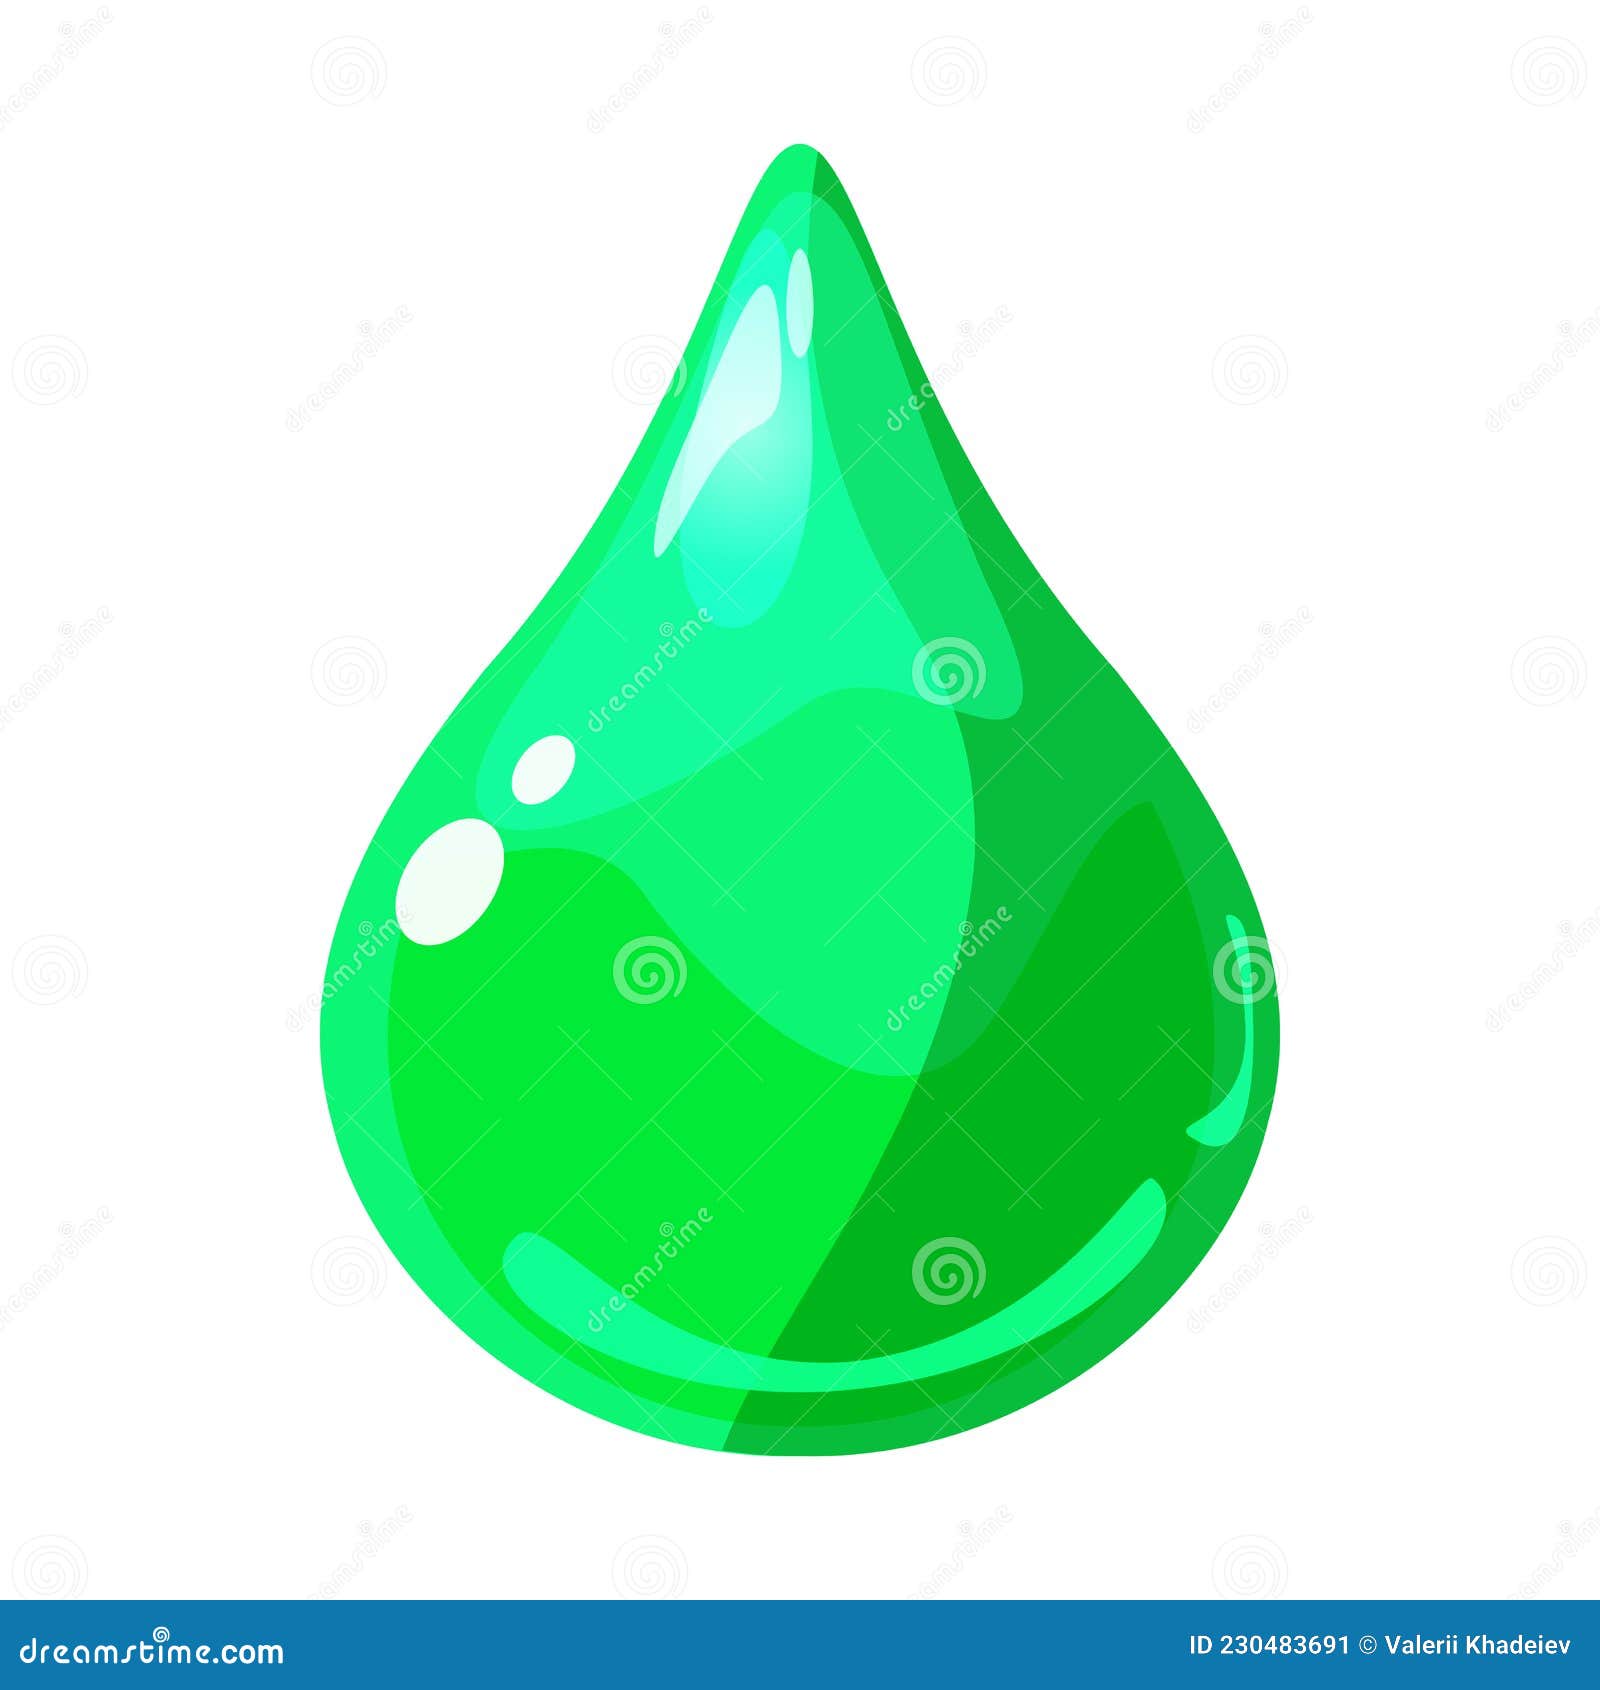 Drop Green Shiny Glossy Colorful Game Asset